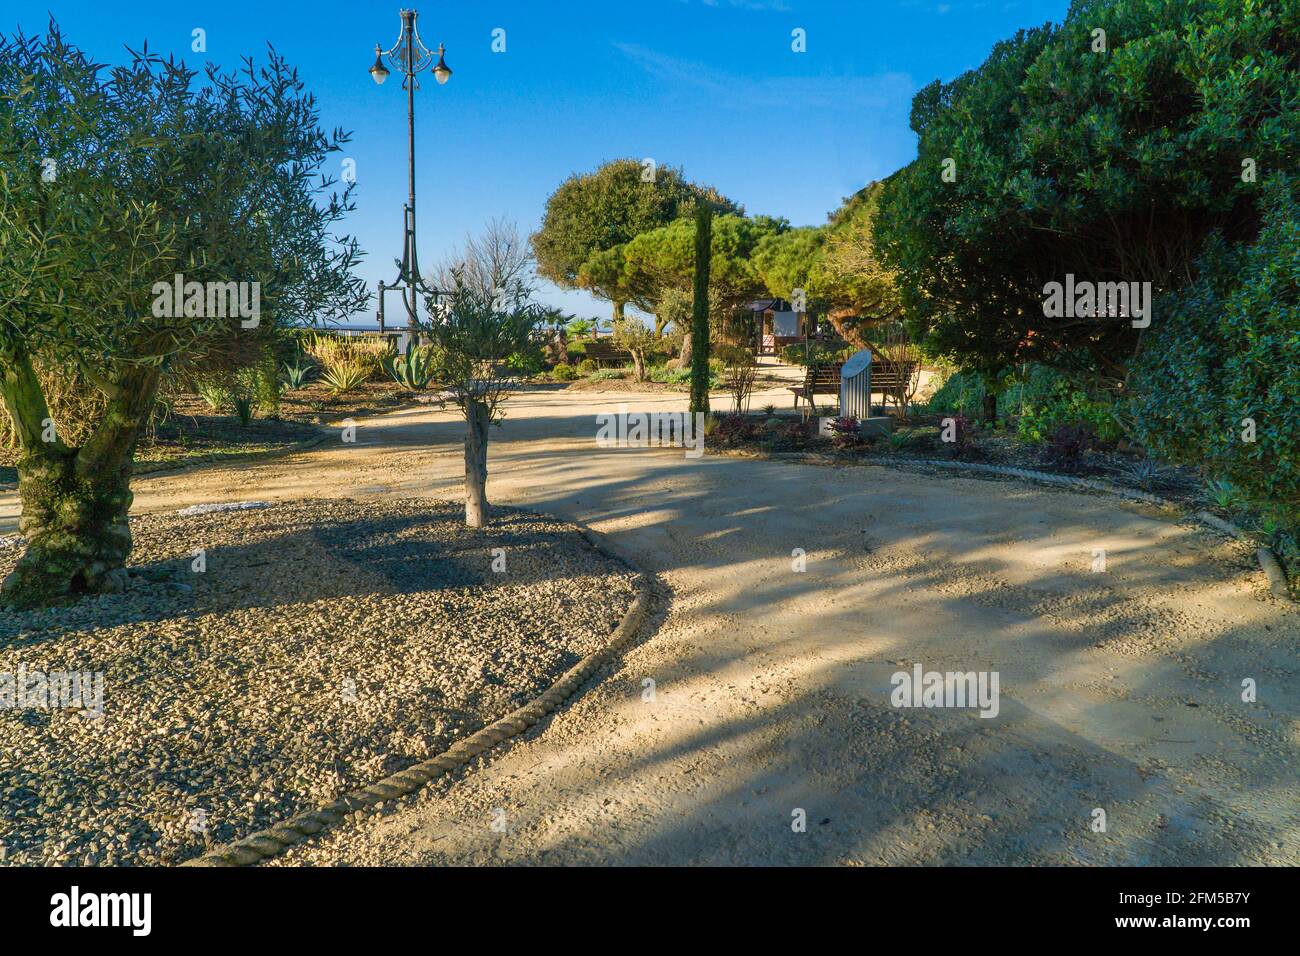 The Mediterranean Garden on the seafront at Clacton on Sea Essex UK. April 2021. Stock Photo